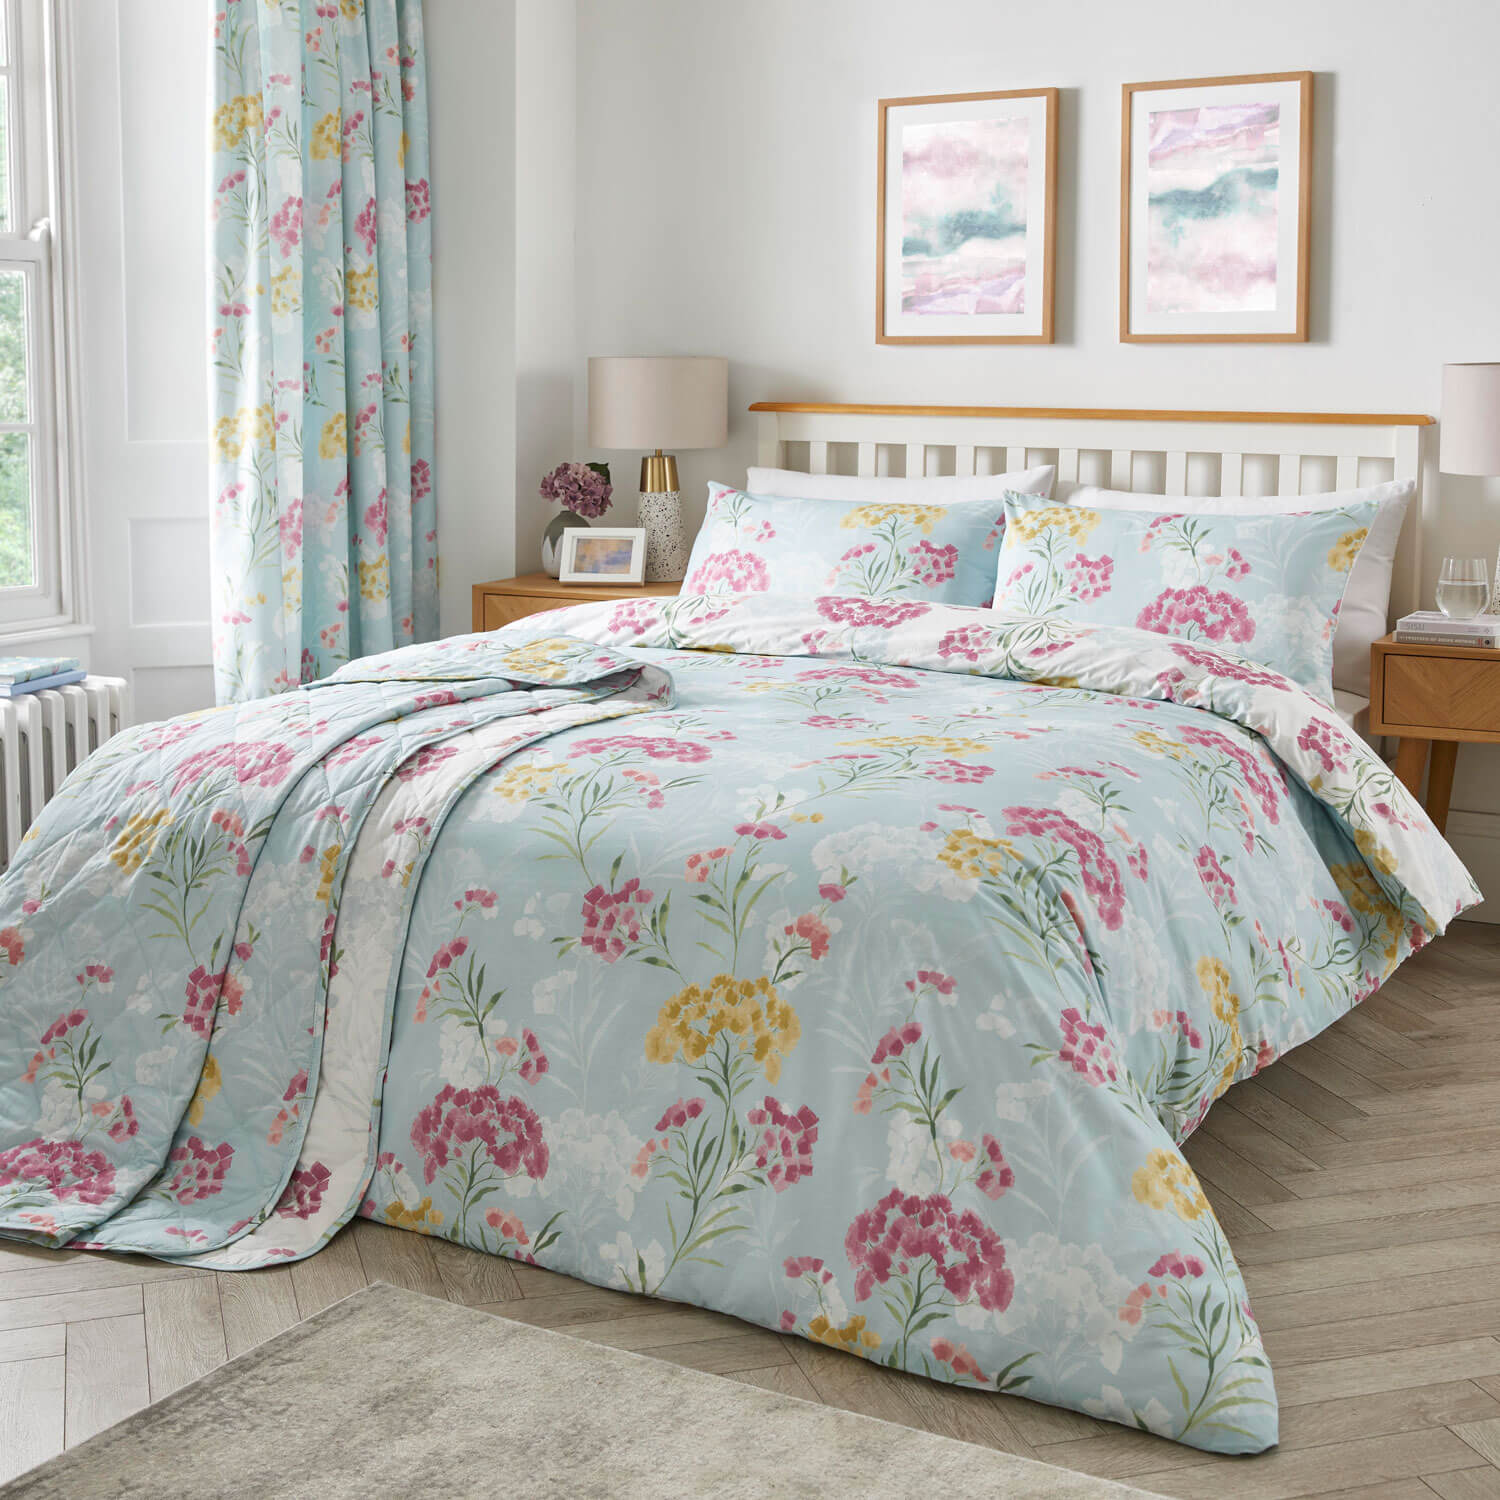  The Home Collection Isadora Duvet Set 2 Shaws Department Stores